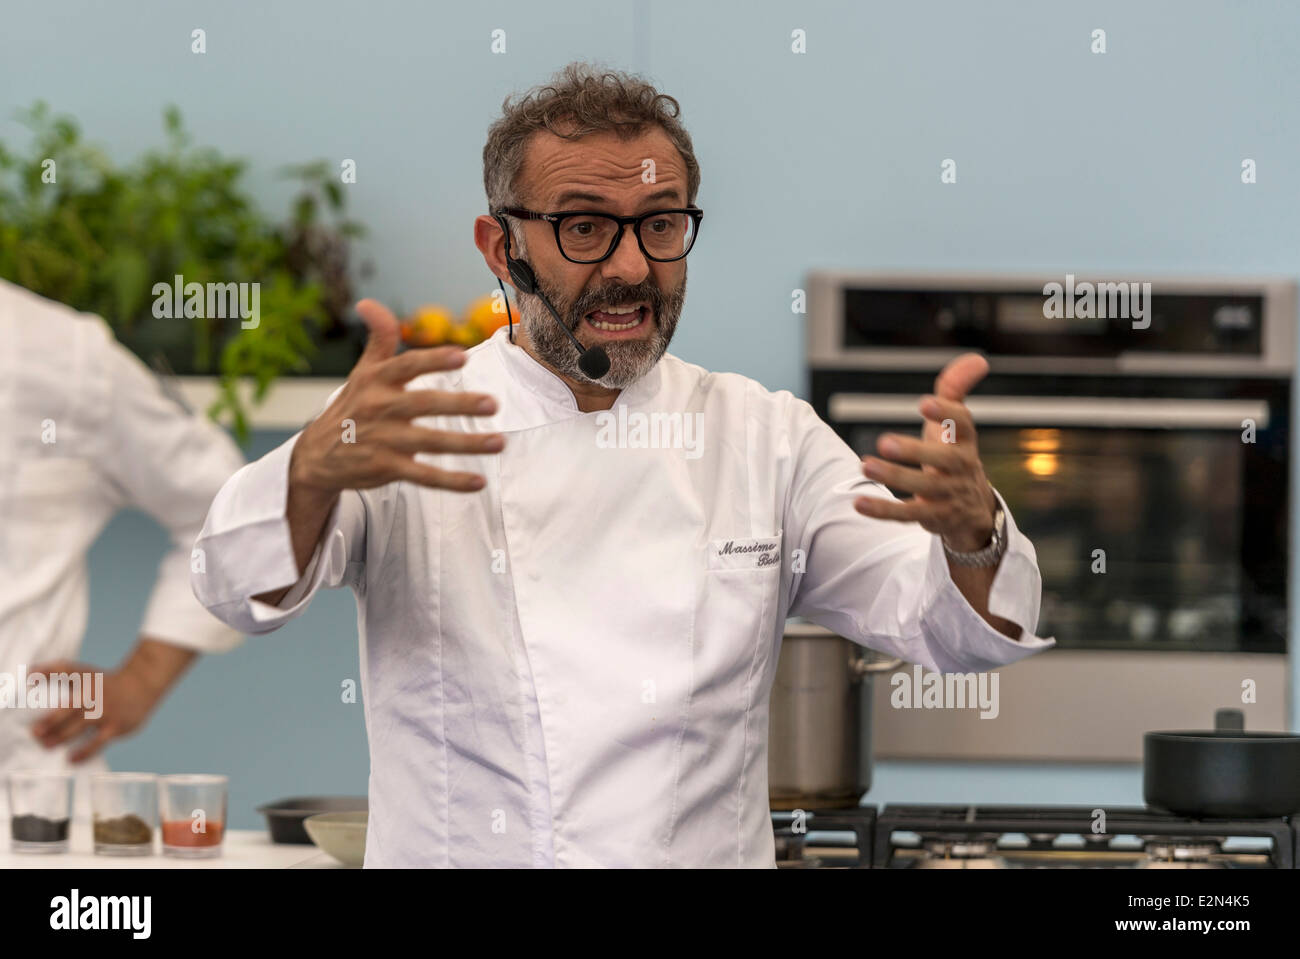 Massimo Bottura is the chef patron of 3 Michelin star and world's 3rd best restaurant Osteria Francescana in Italy. Stock Photo